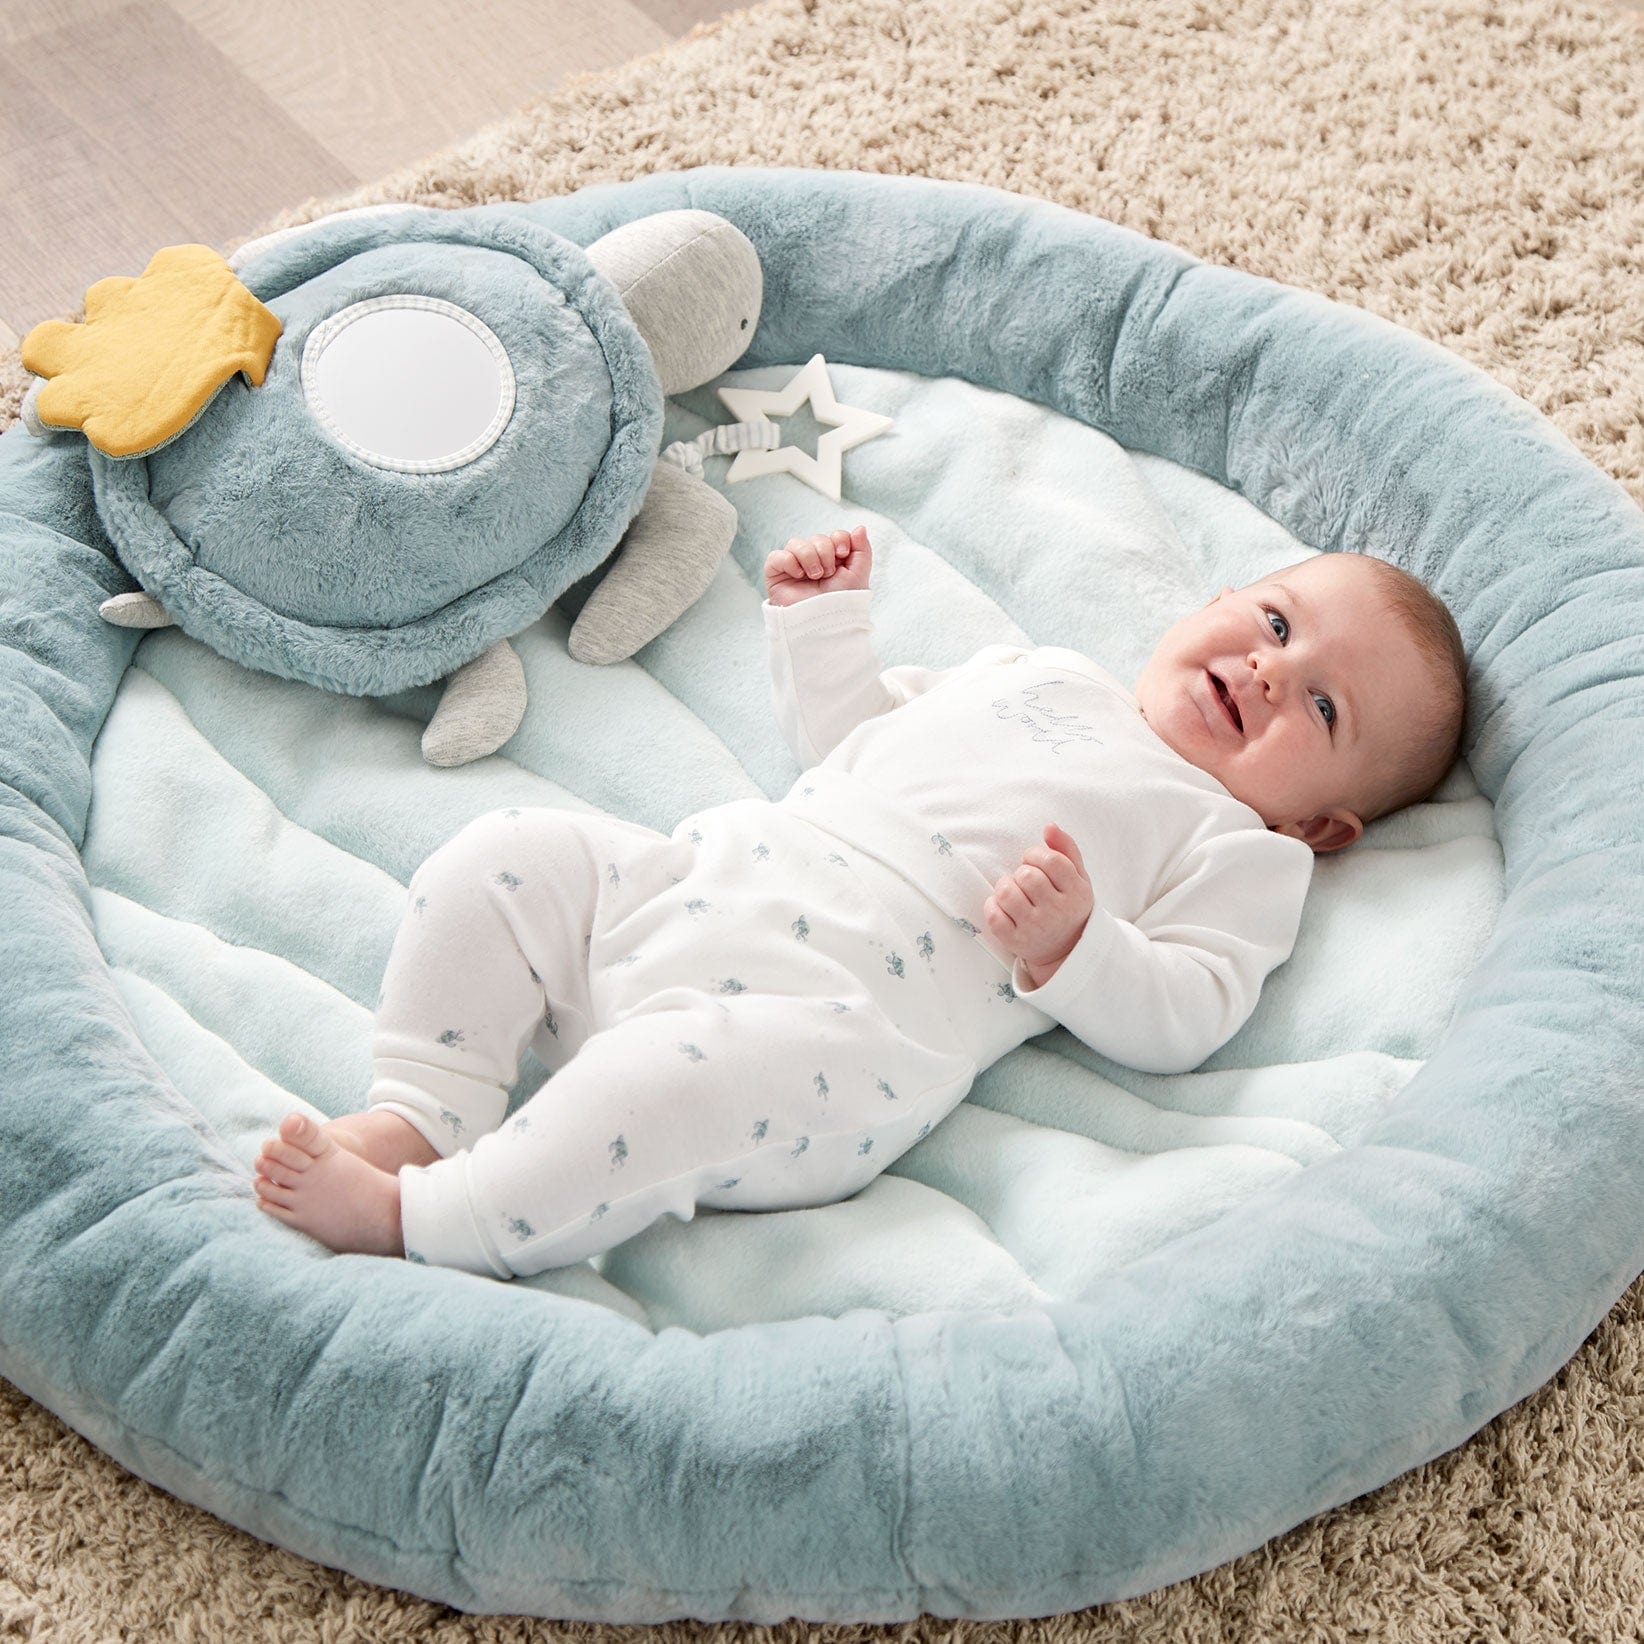 Mamas & Papas Welcome to the World Playmat- Blue Playmats & Gyms 7736MC101 5057232015444